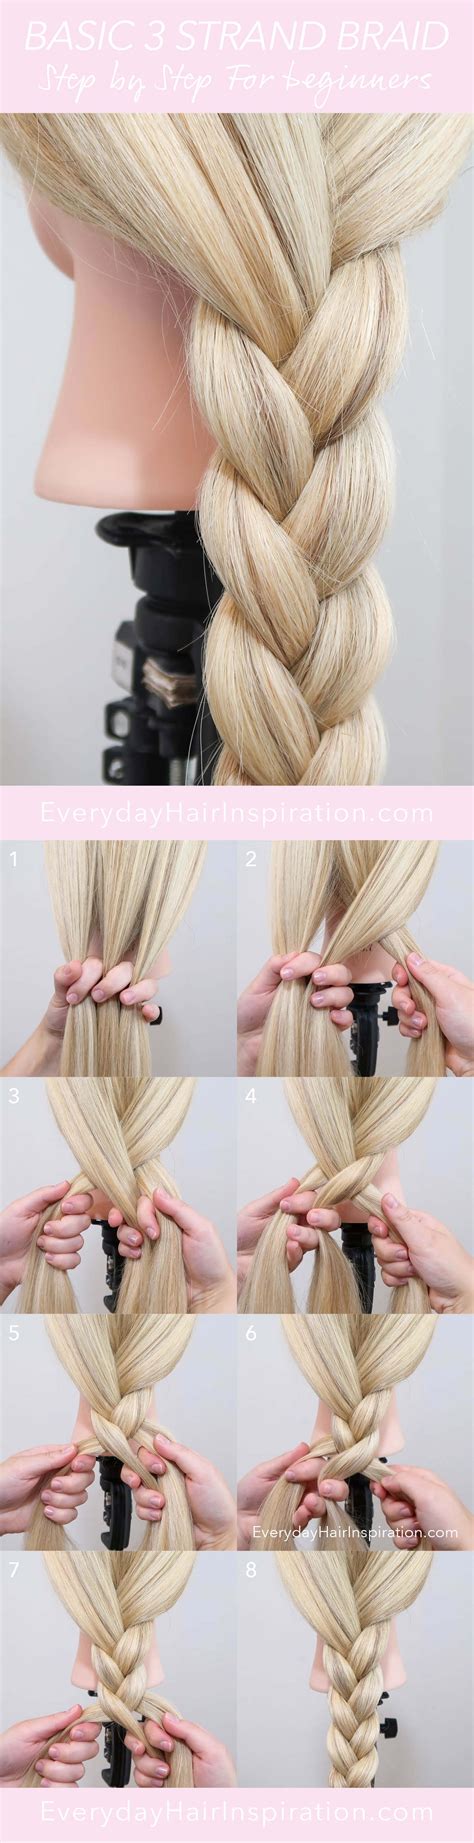 How do you braid your scalp step by step?